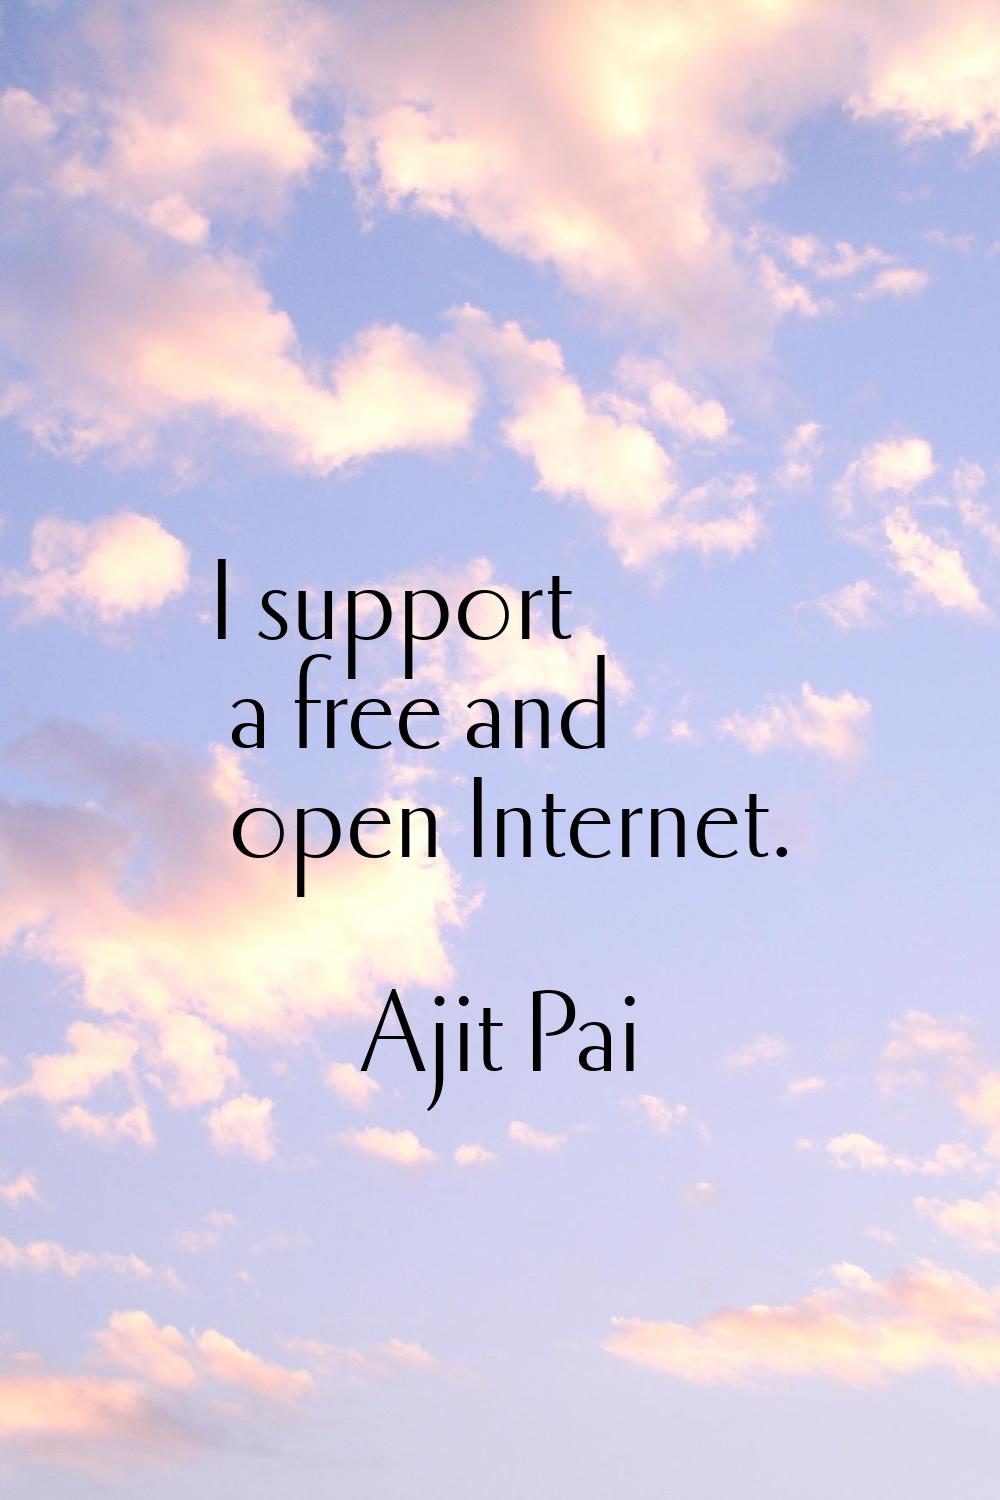 I support a free and open Internet.